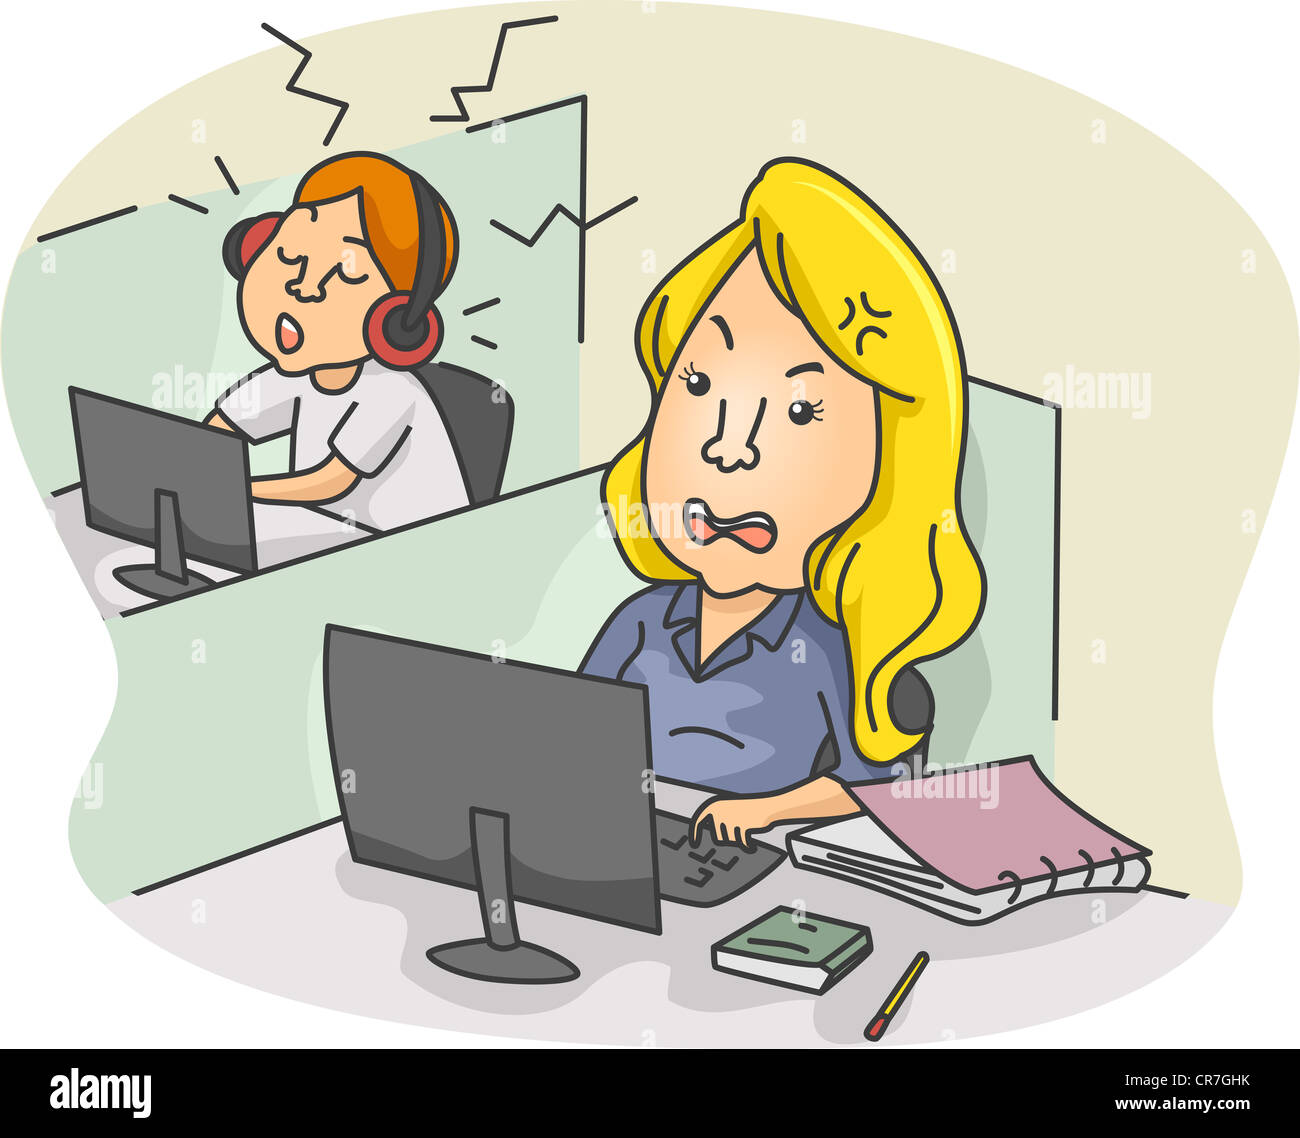 Illustration of a Girl Annoyed at the Noise Coming from the Next Cubicle Stock Photo